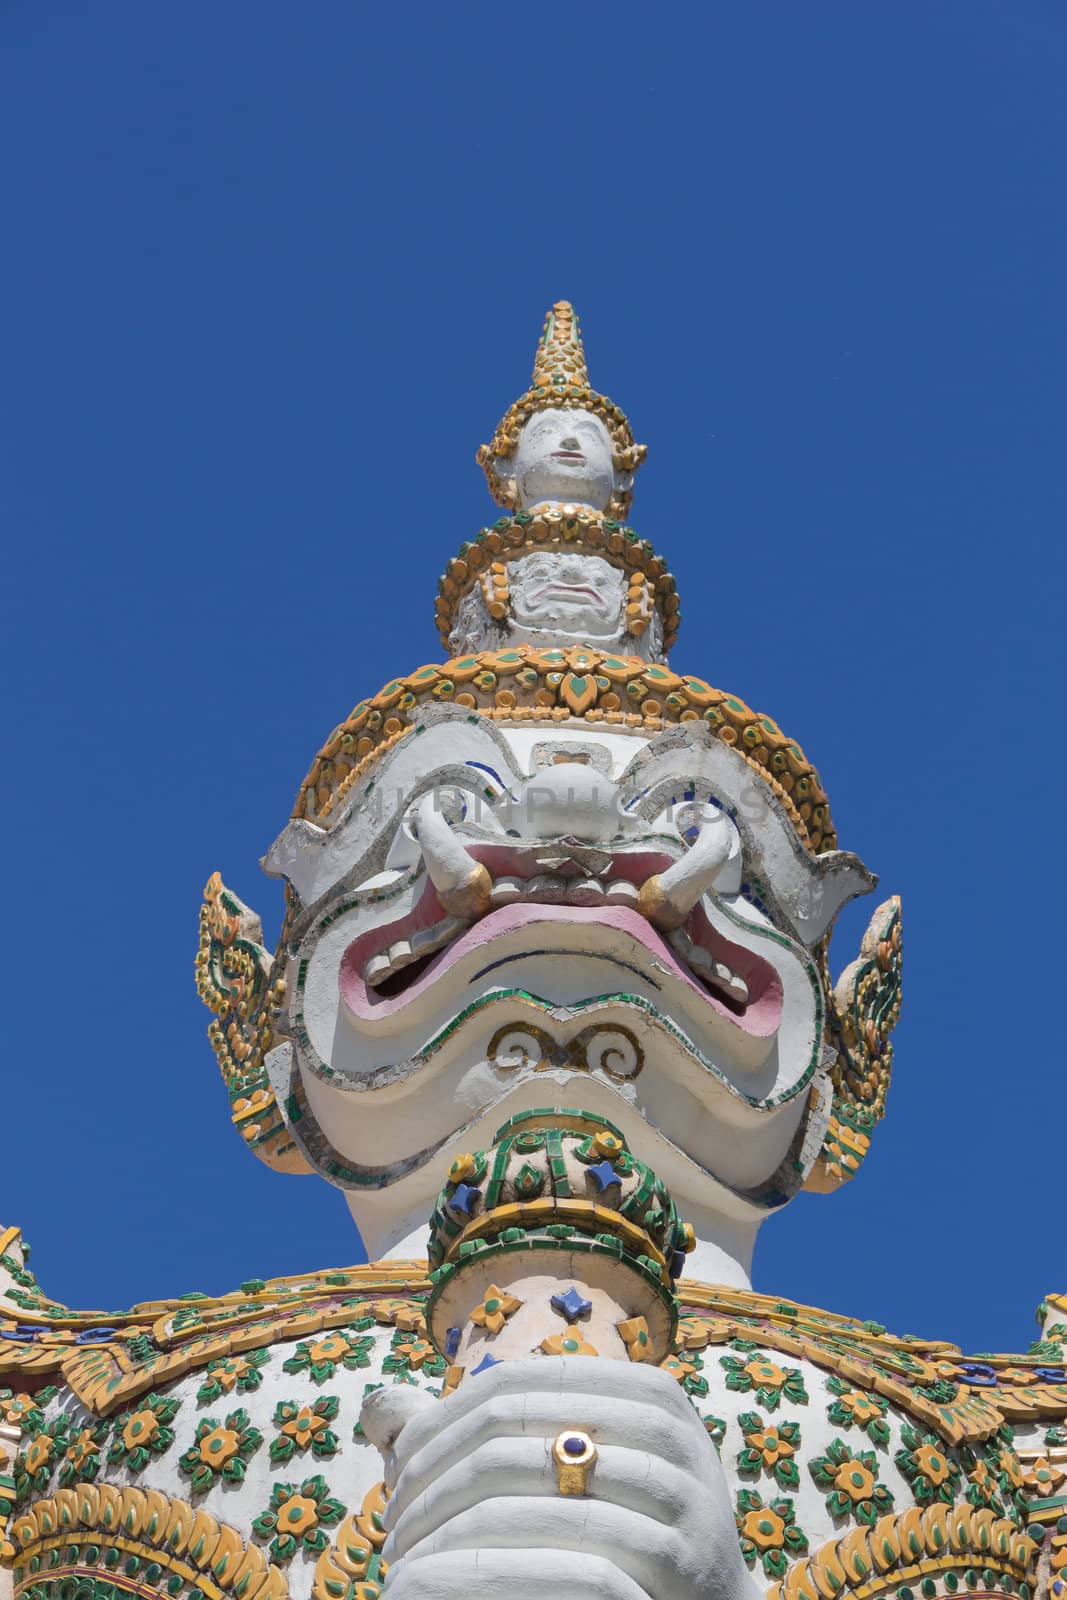 White guardian statue at the Temple of Dawn was beautifully decorated with tiny pieces of colored ceramics and Chinese porcelain placed delicately into intricate patterns. It is one of Bangkok's world-famous landmarks.